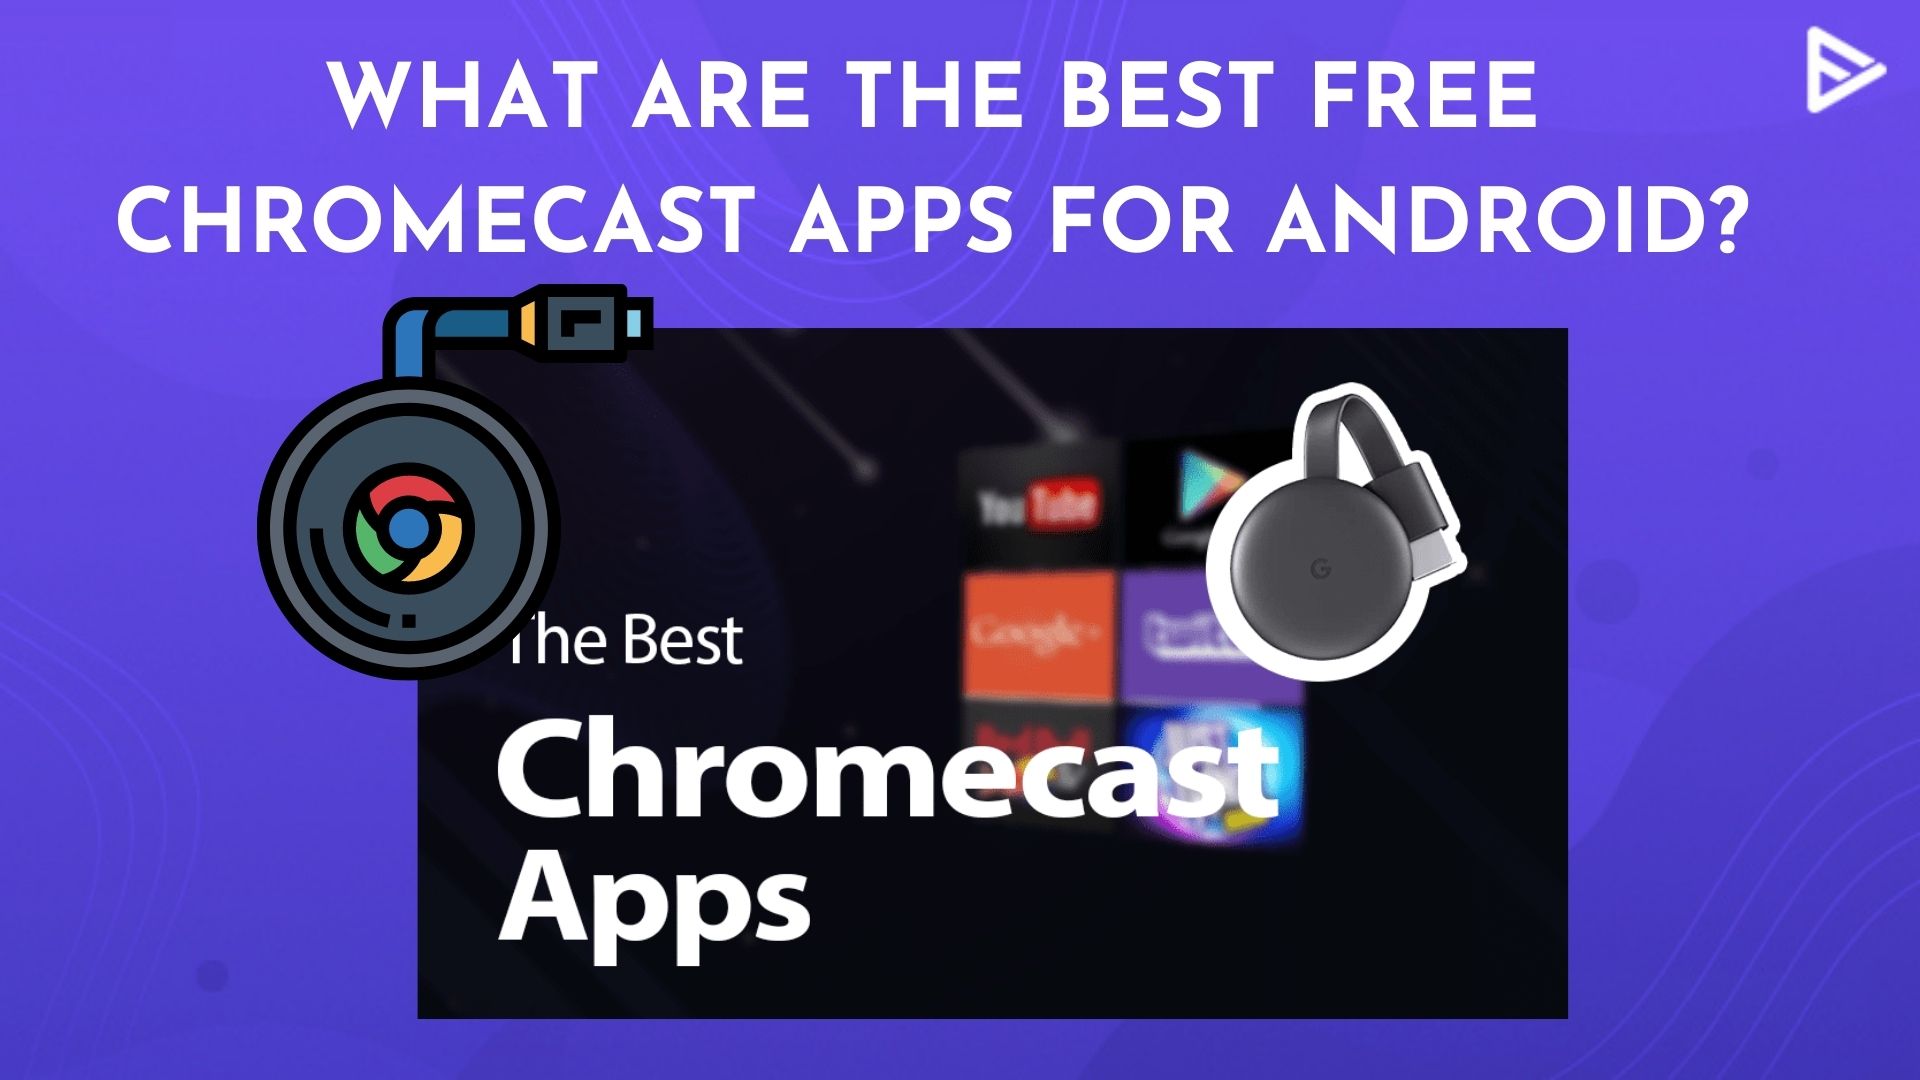 træ manuskript boom What Are The Best Free Chromecast Apps For Android?